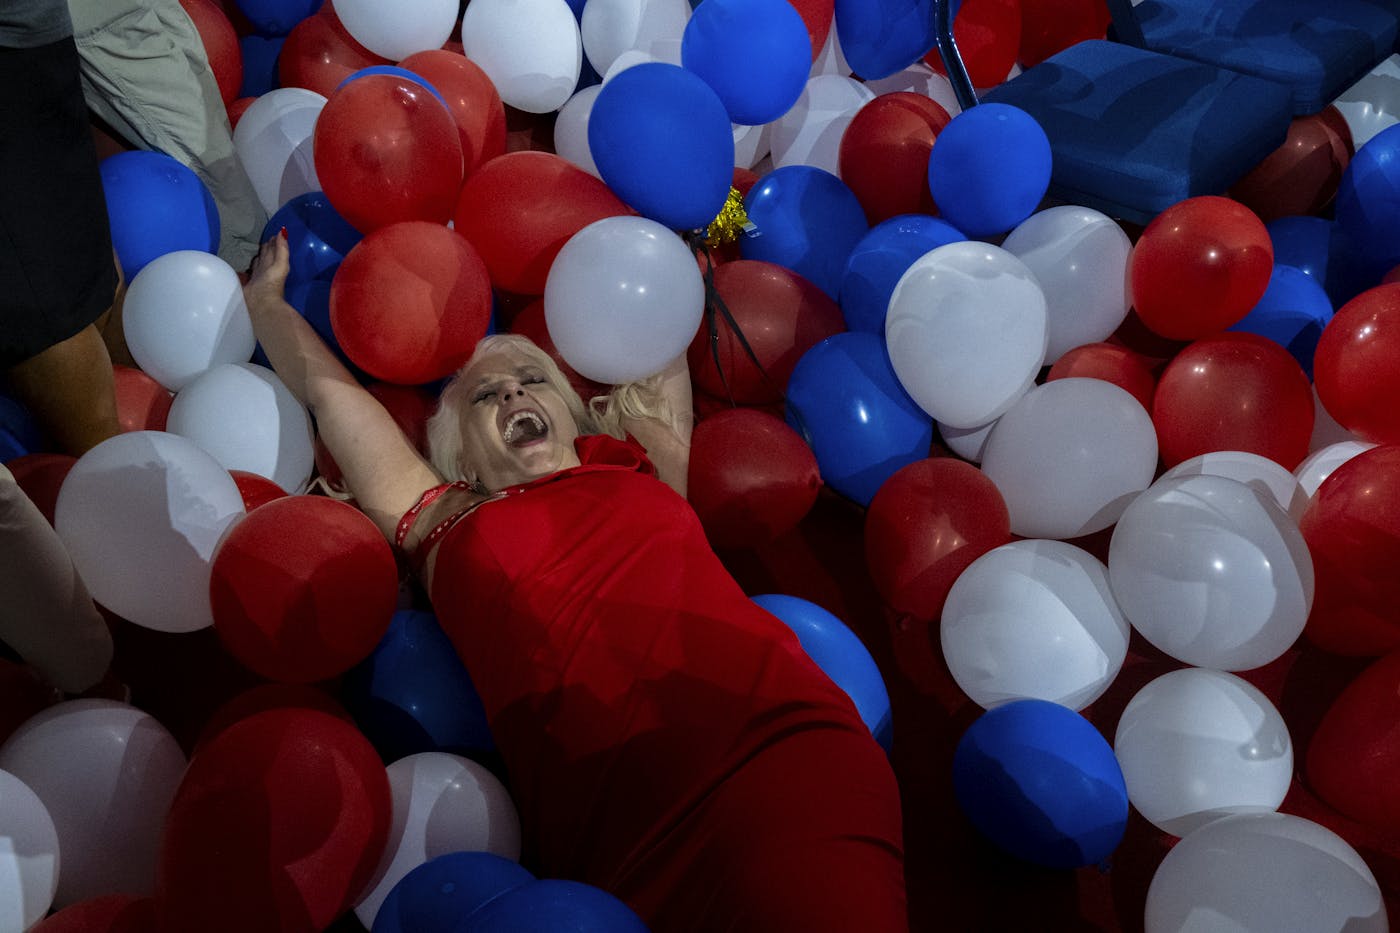 A photograph of a woman in a red dress joyfully laying in a pile of balloons the Republication National Convention 